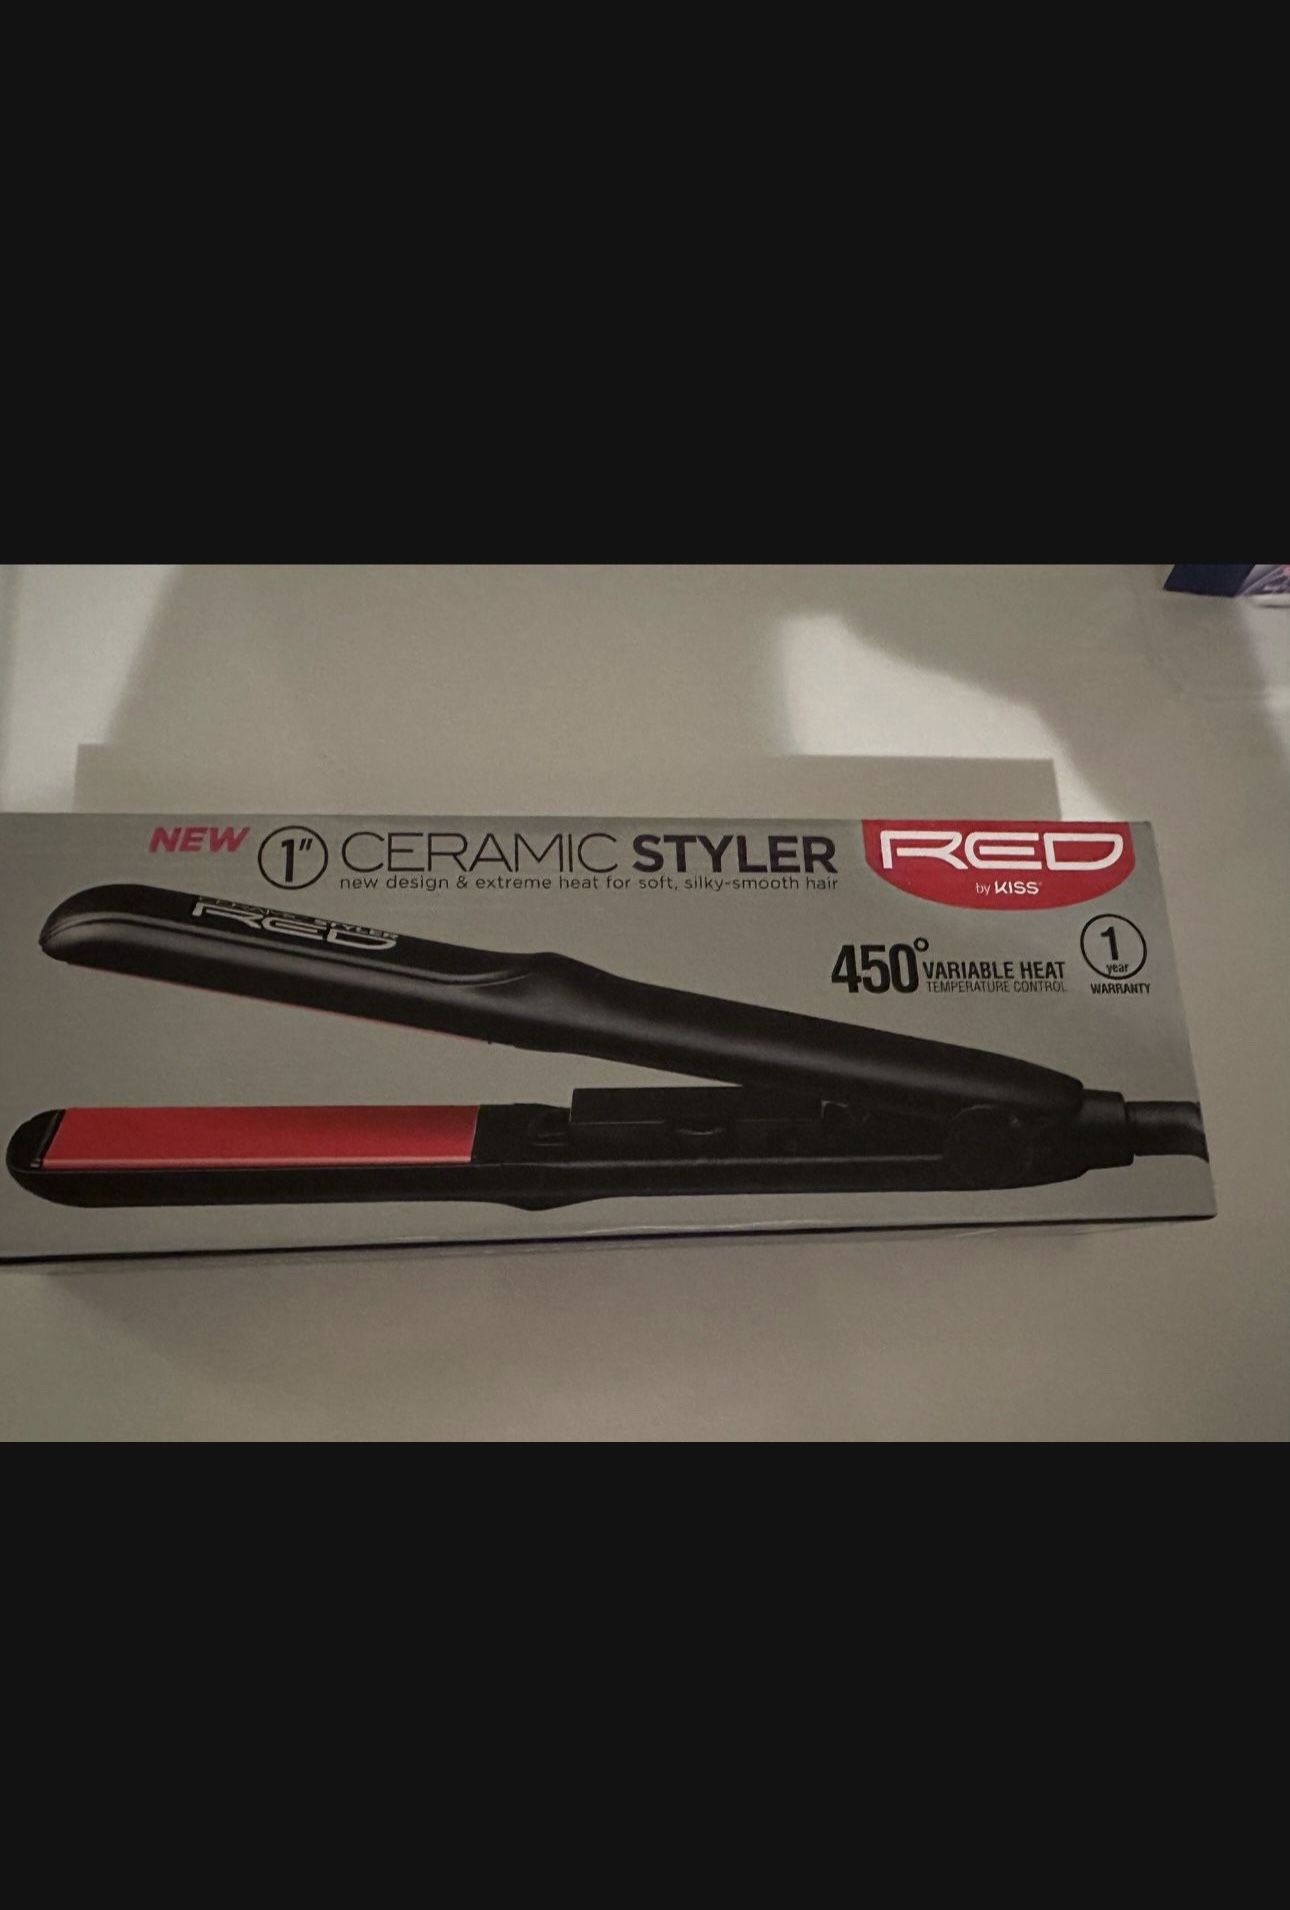  New Red By Kiss Flat Iron! 